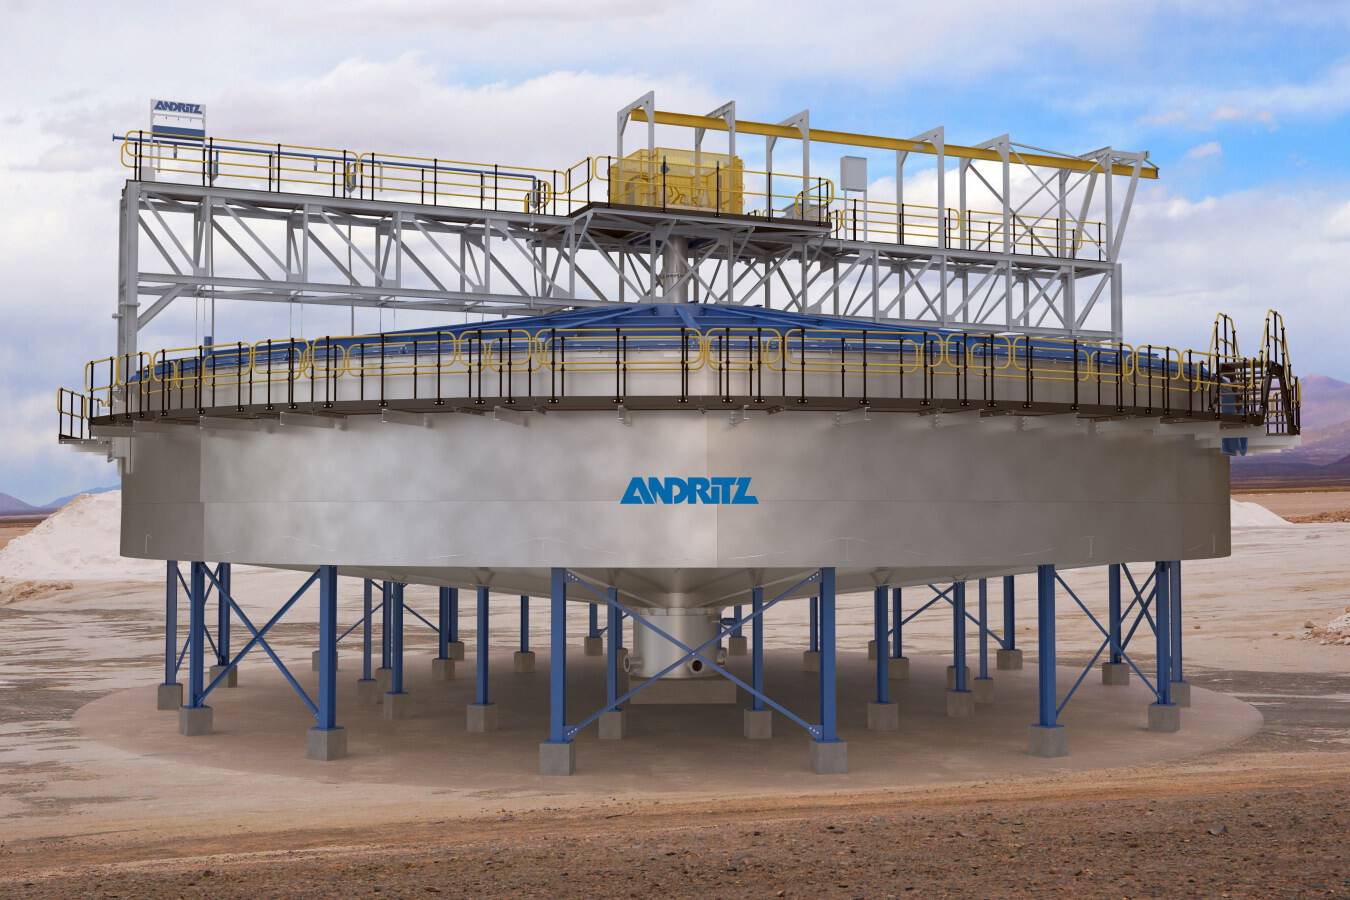 ANDRITZ introduces LiKOSET – a bespoke thickener solution Highly efficient and sustainable processing for the lithium, agricultural, salt and chemical industries. For the expansion of e-mobility and further applications